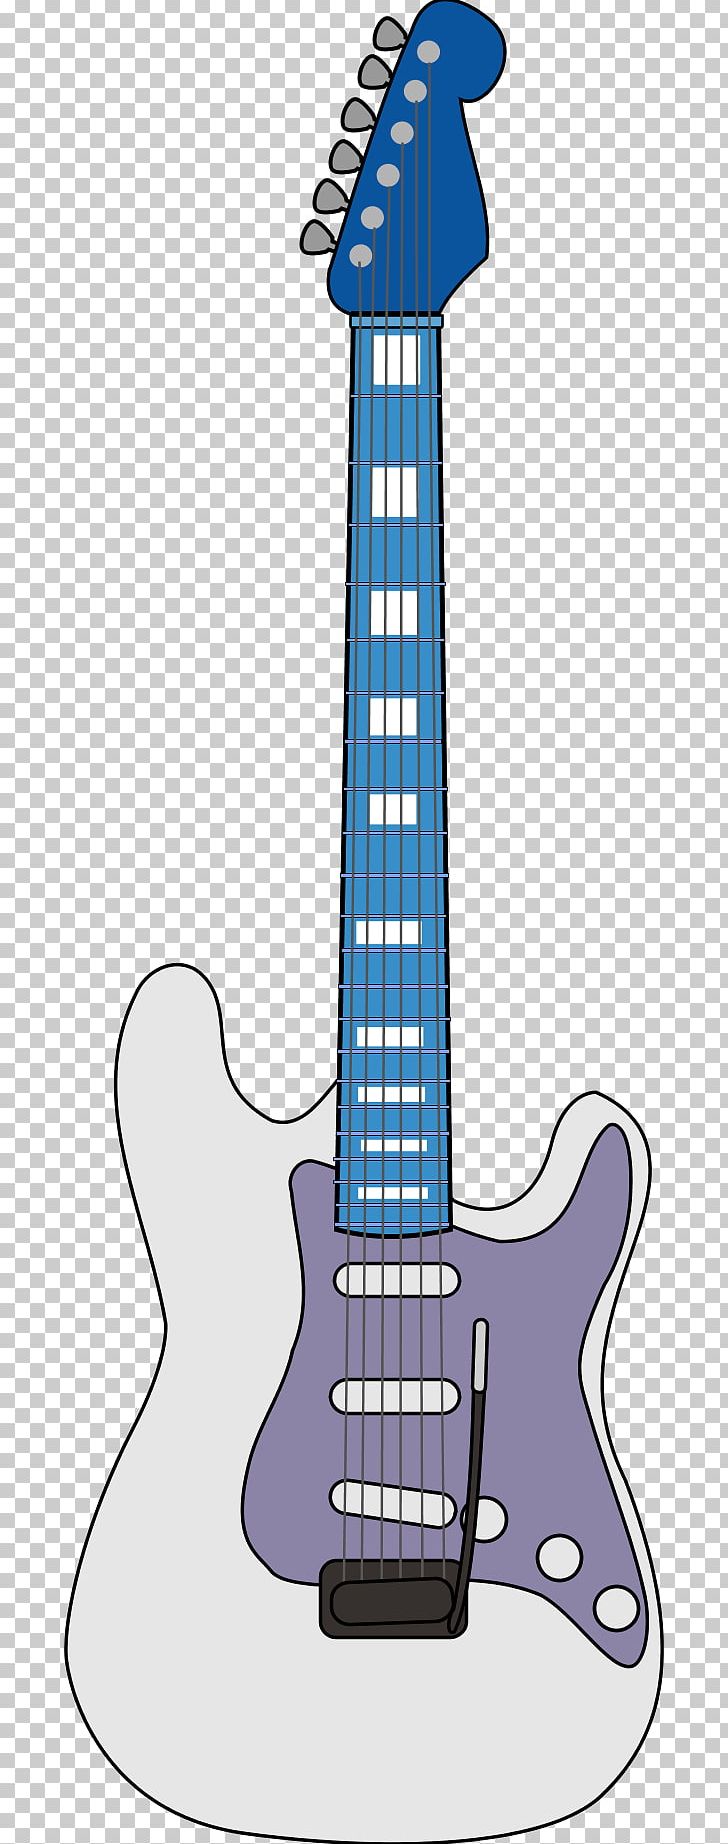 Fender Stratocaster Electric Guitar PNG, Clipart, Acoustic Guitar, Electric Guitar, Fender Stratocaster, Guitar, Guitar Accessory Free PNG Download